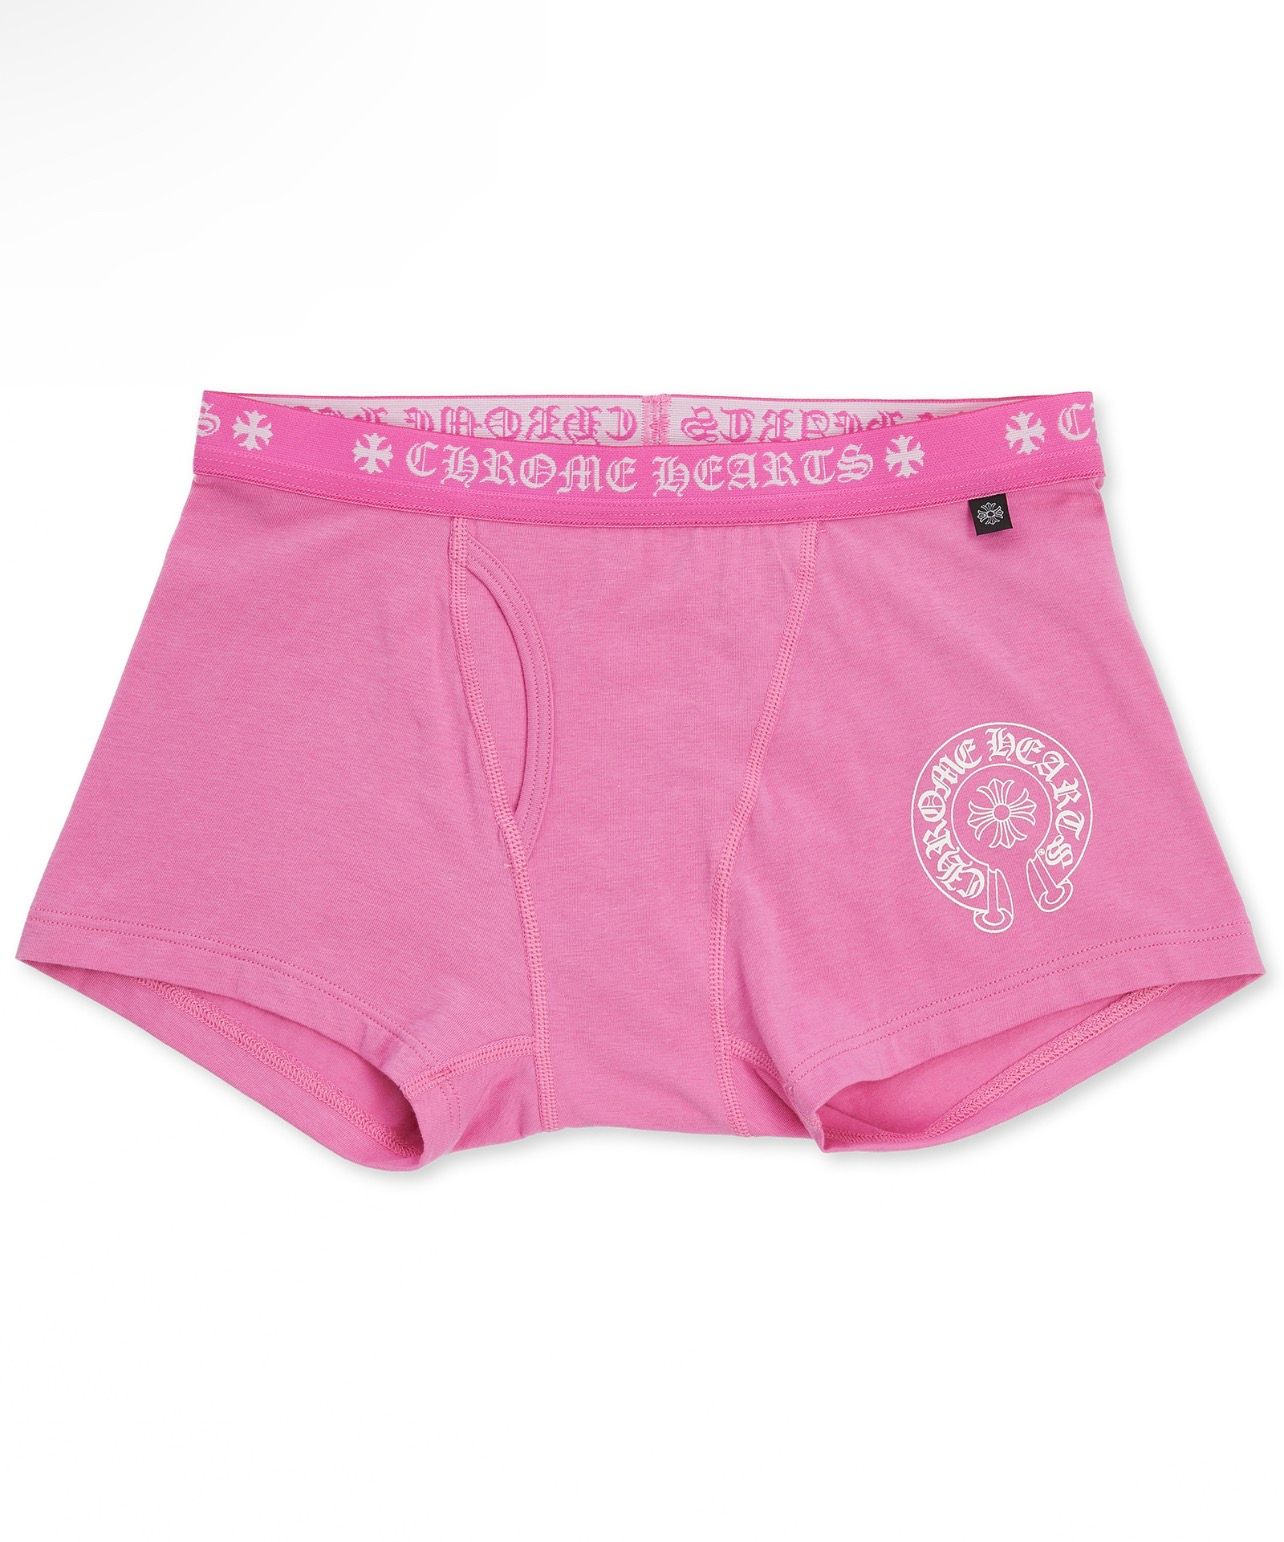 Chrome Hearts Medium Pink Chrome Hearts Boxer Brief Size 30 - 1 Preview